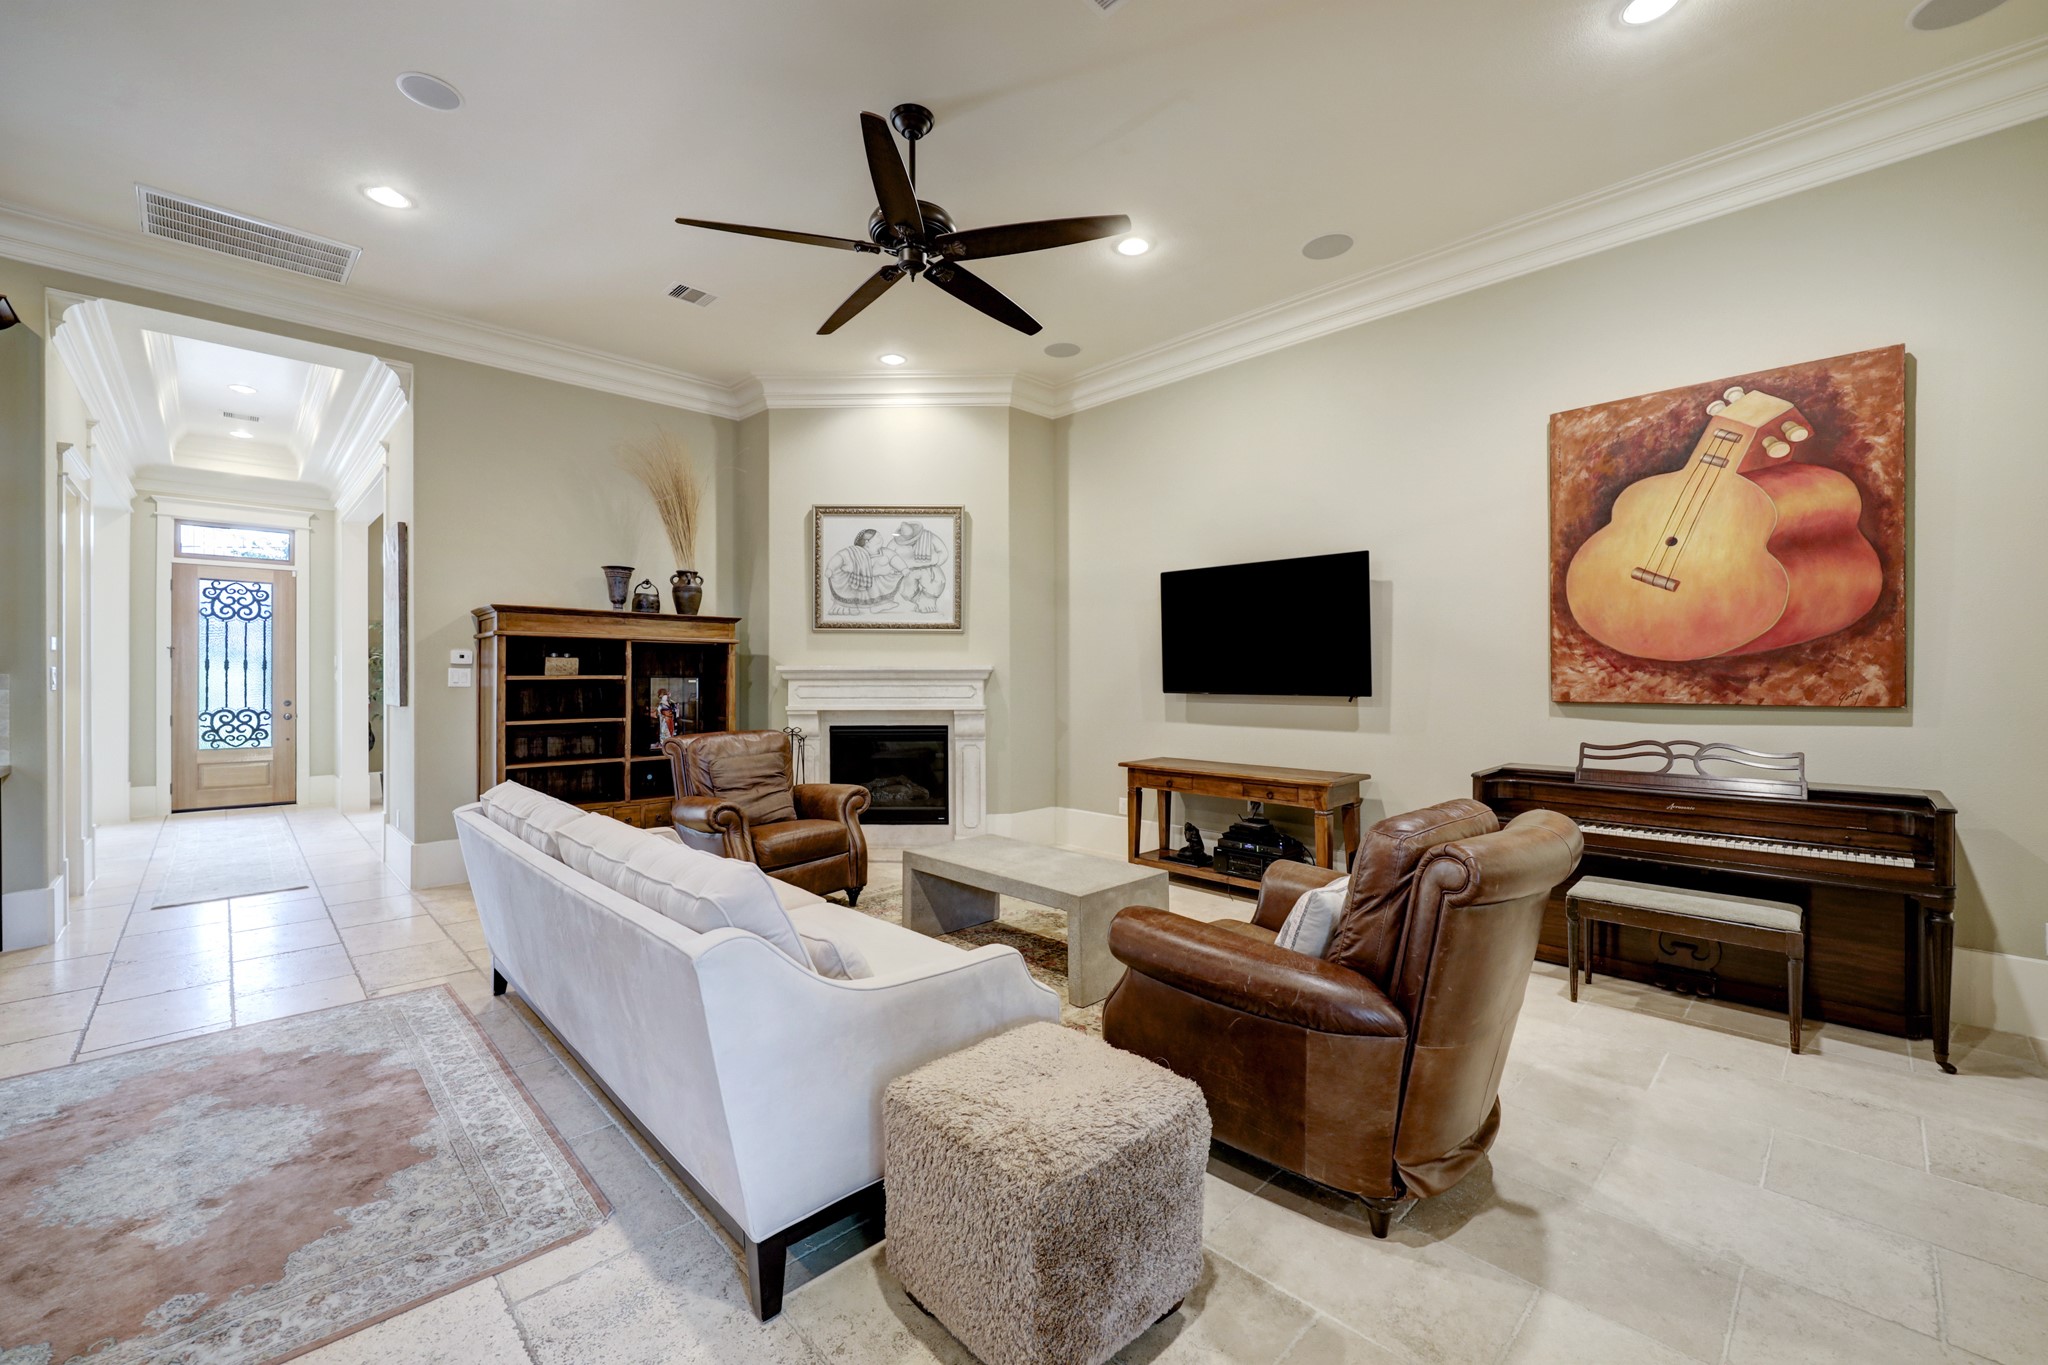 The family room has a gas log fireplace and adjoins the gourmet kitchen.  Fully wired for sound through the Control 4 system.